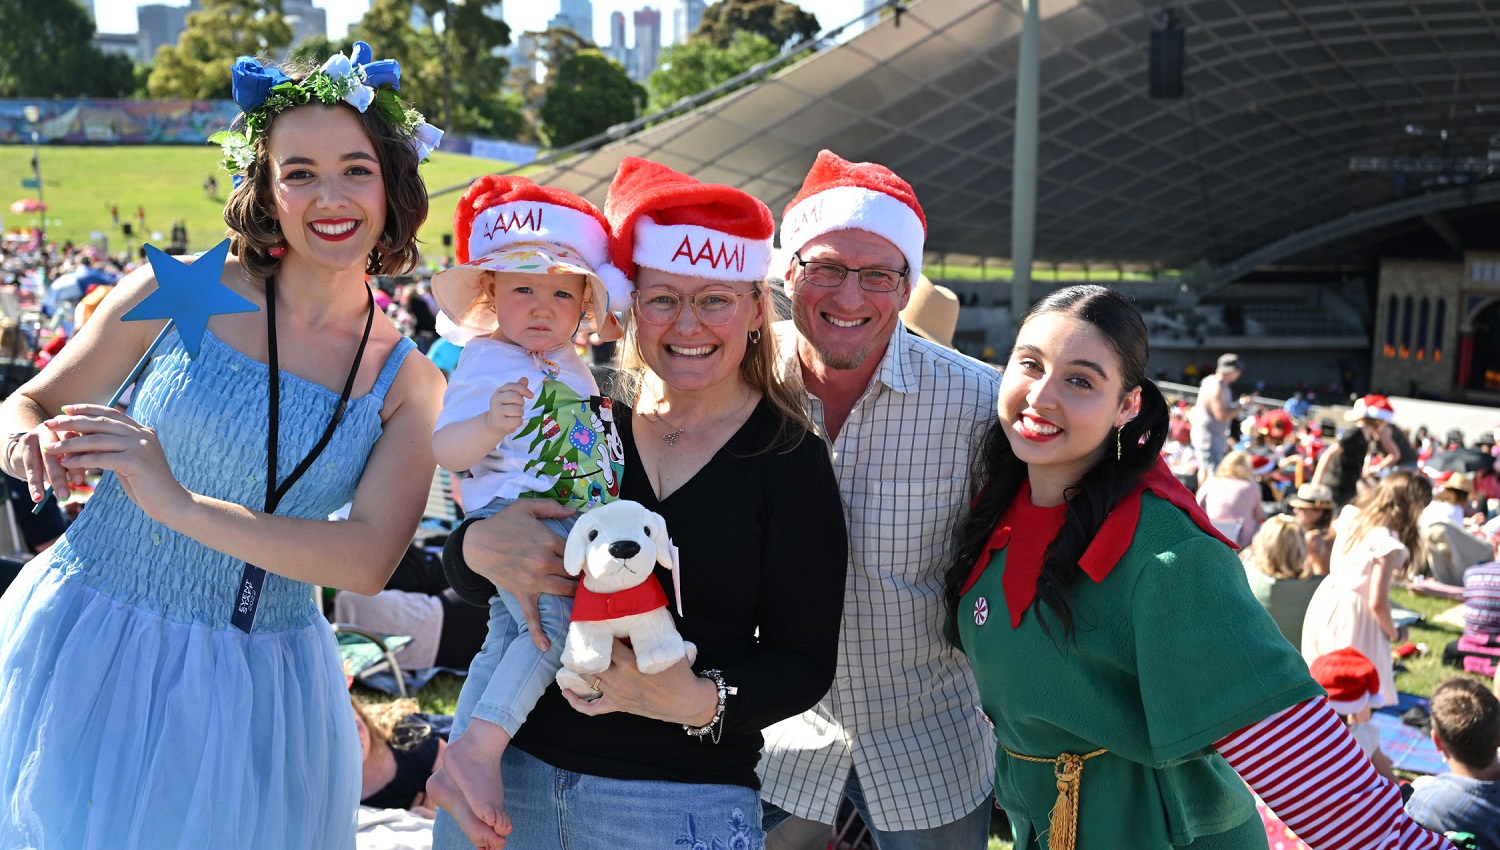 A man, a woman and a child wear Santa hats between two women dressed as a fairy and an elf in front of the Sidney Myer Music Bowl during the day at Carols